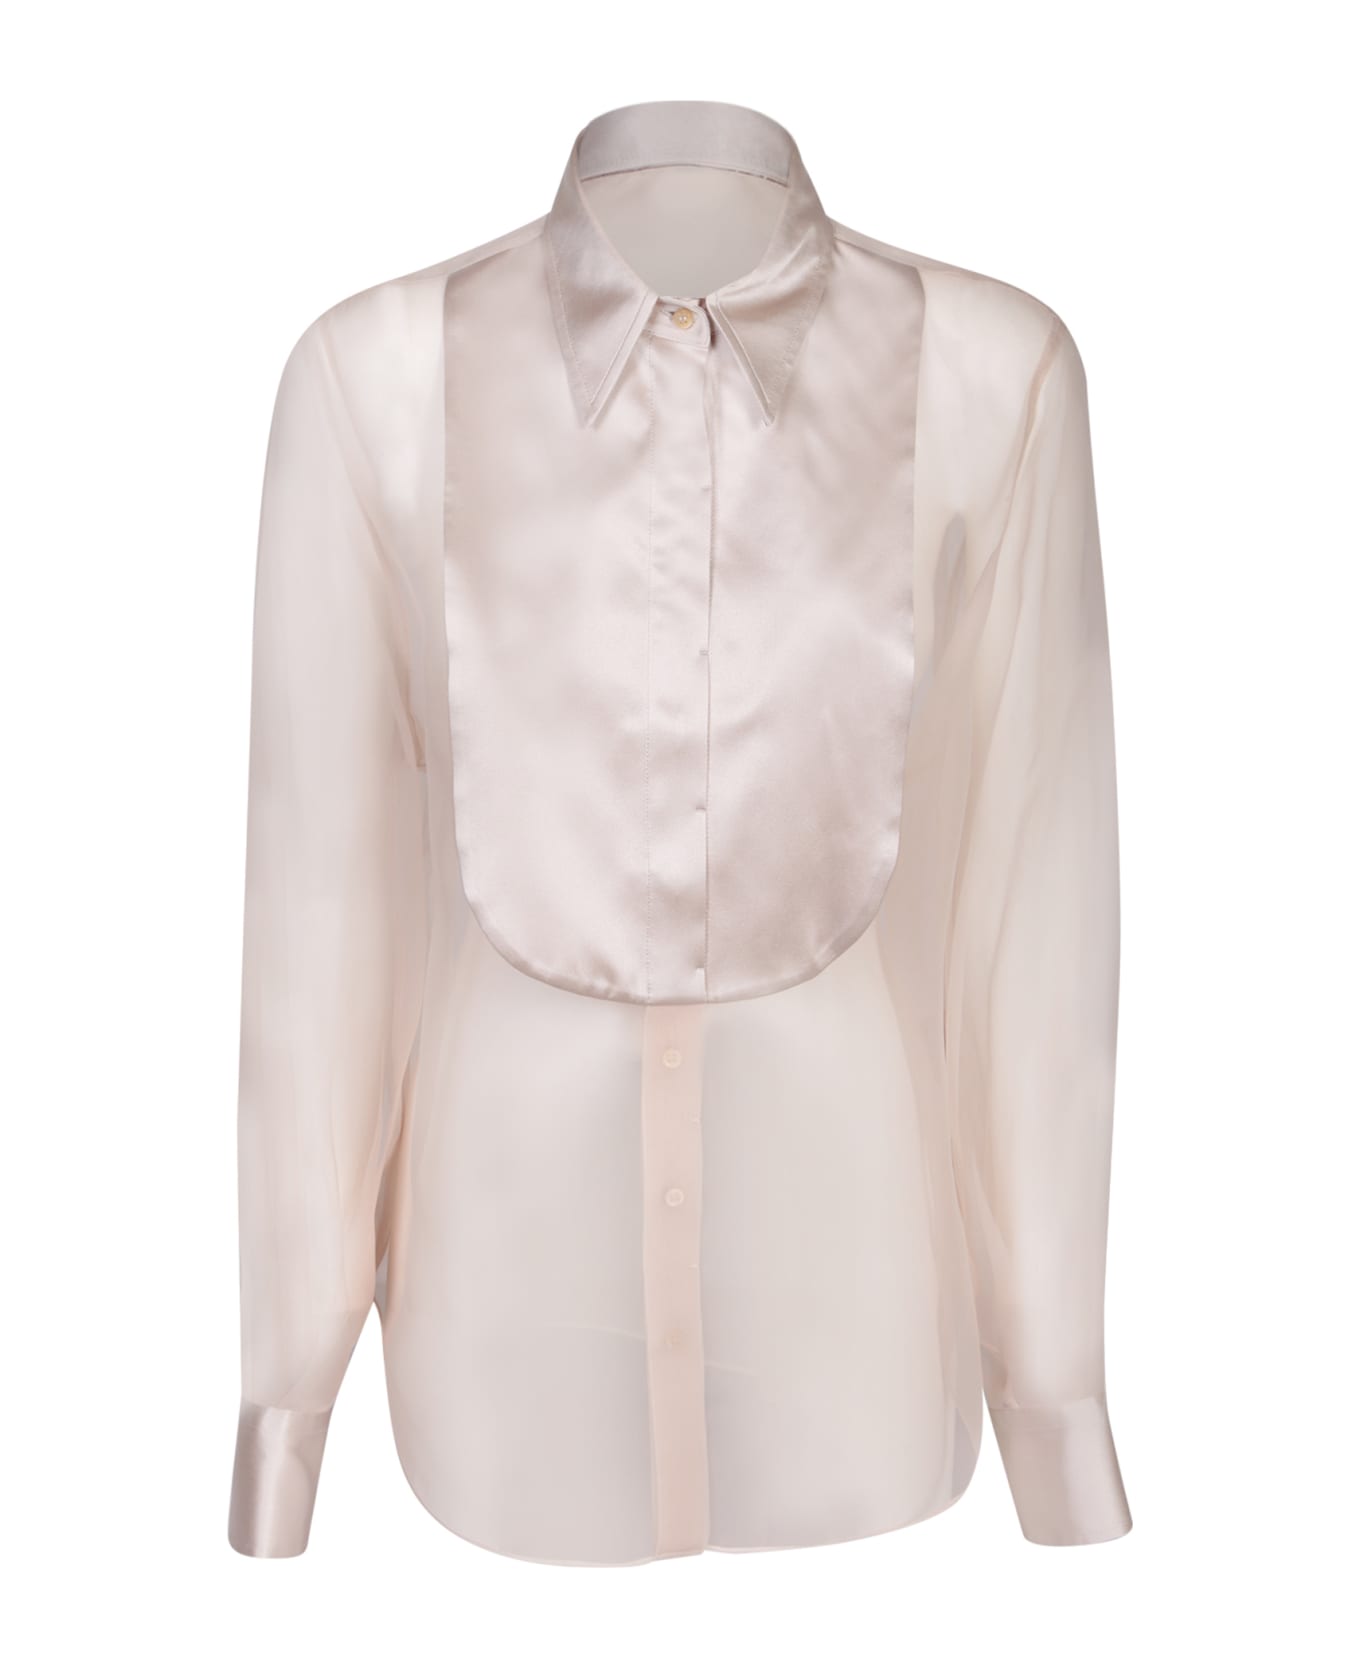 Brunello Cucinelli Buttoned Long-sleeved Top - Pink